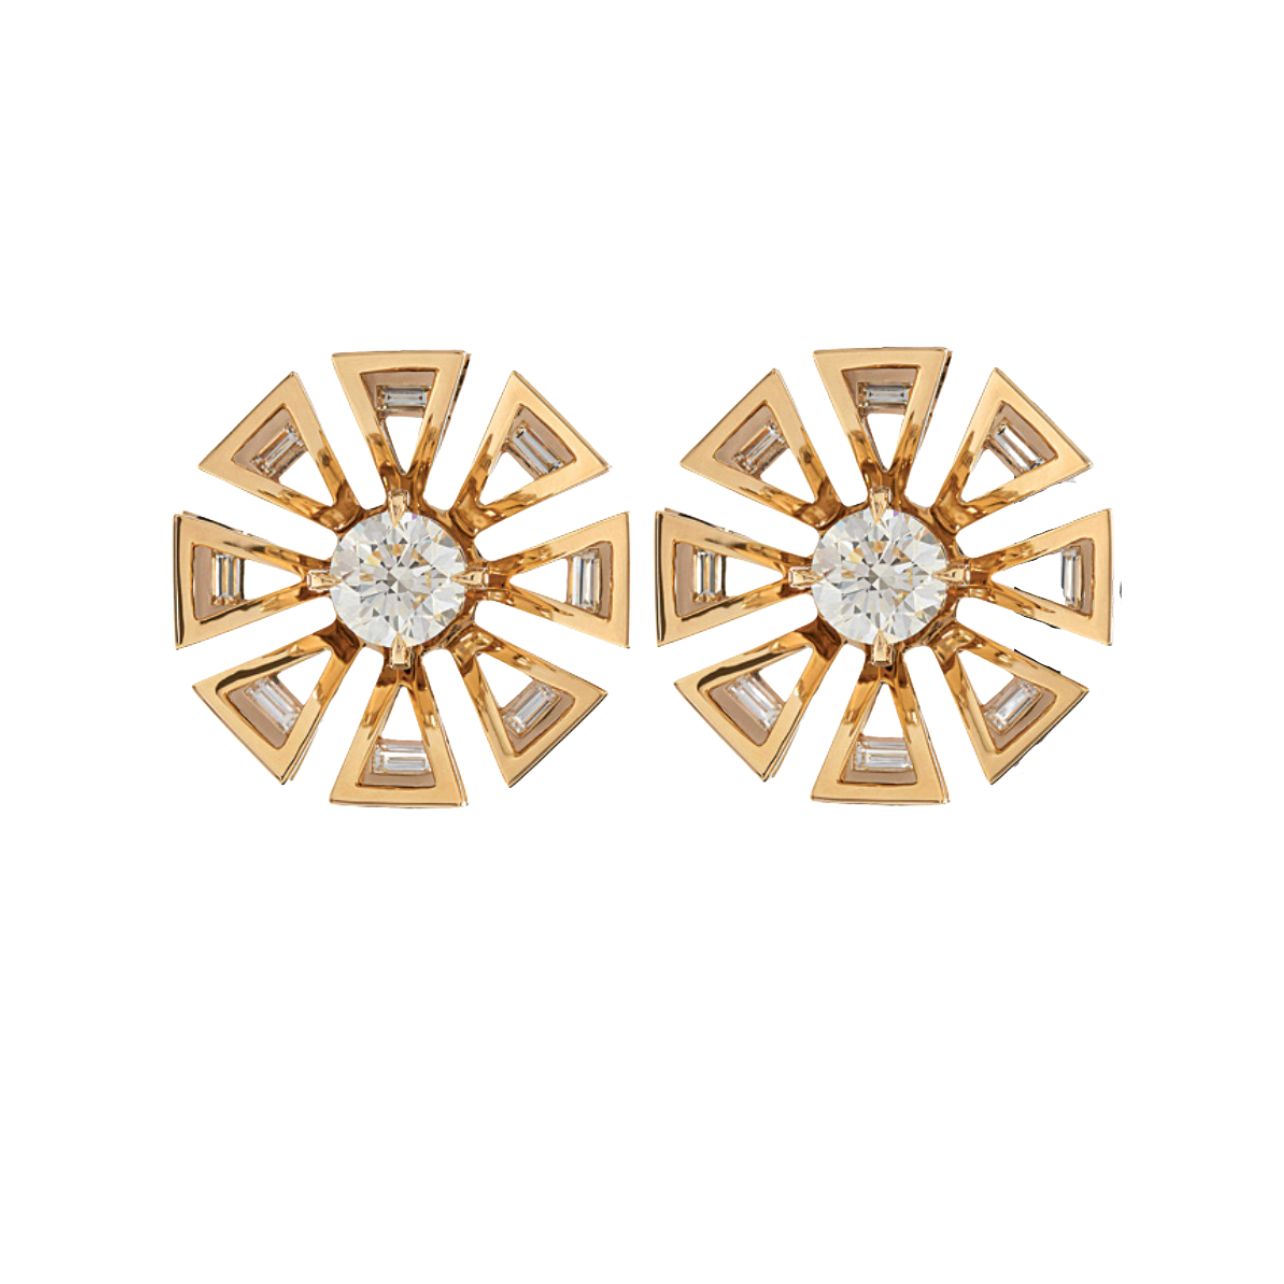 Ara Vartanian earrings made with 18k gold and inverted diamonds